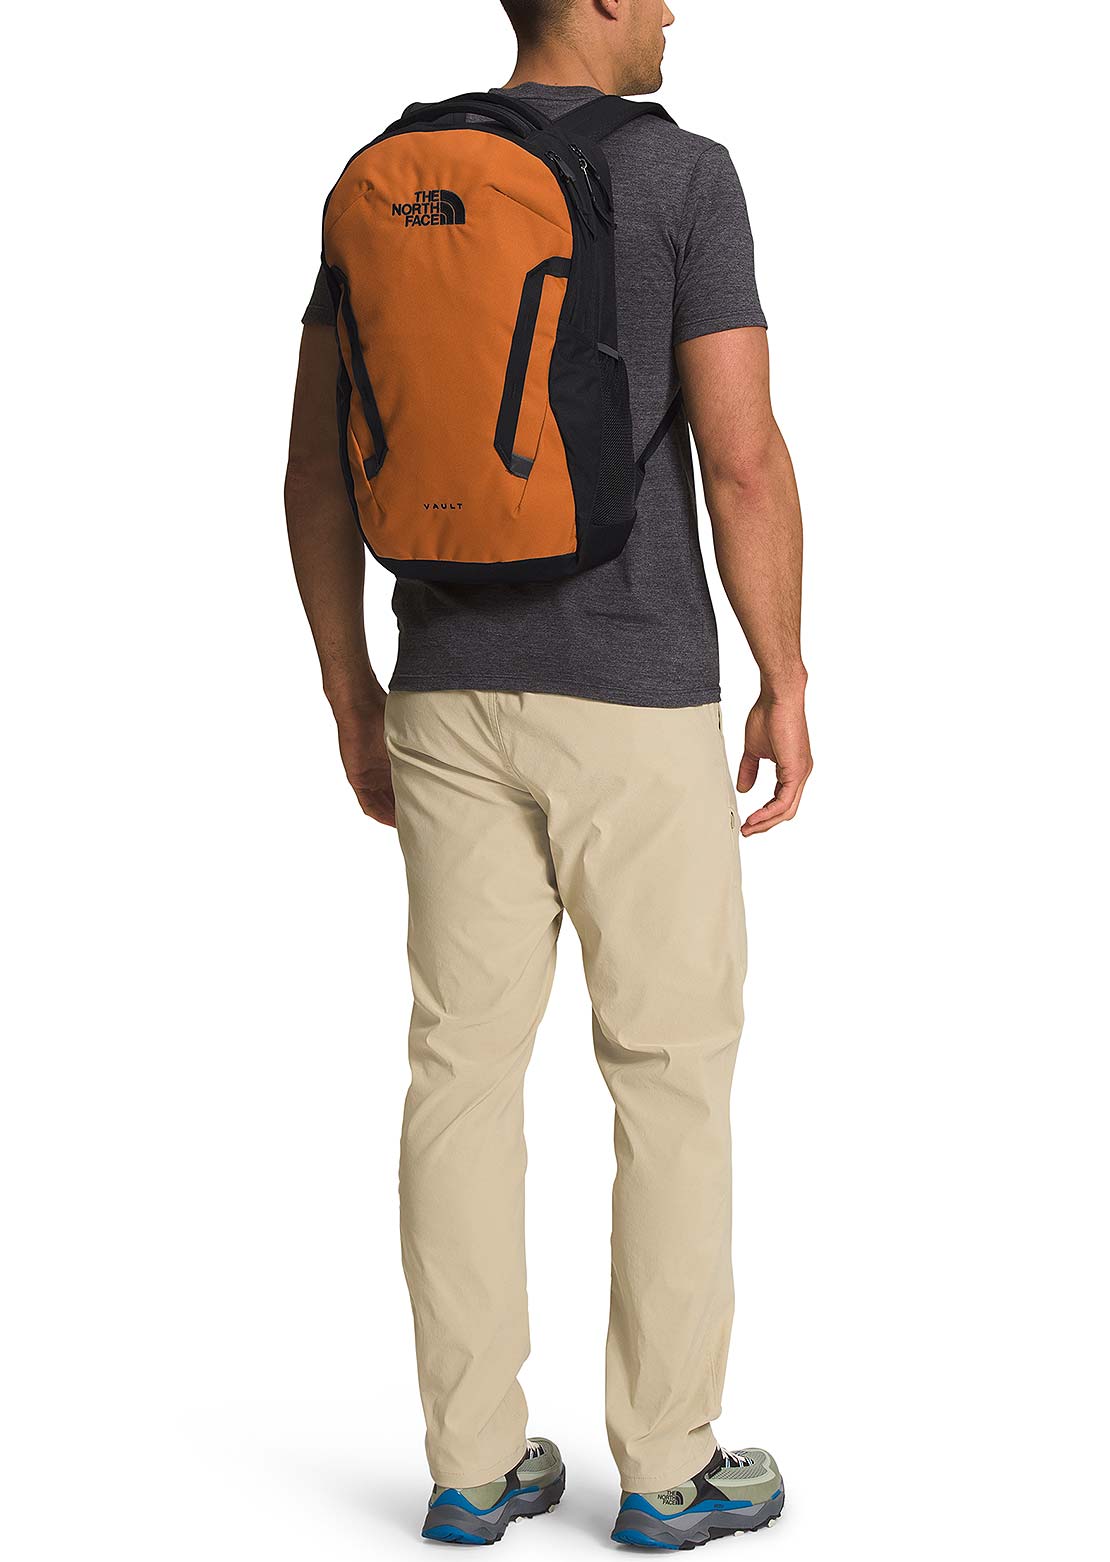 The North Vault Backpack - PRFO Sports